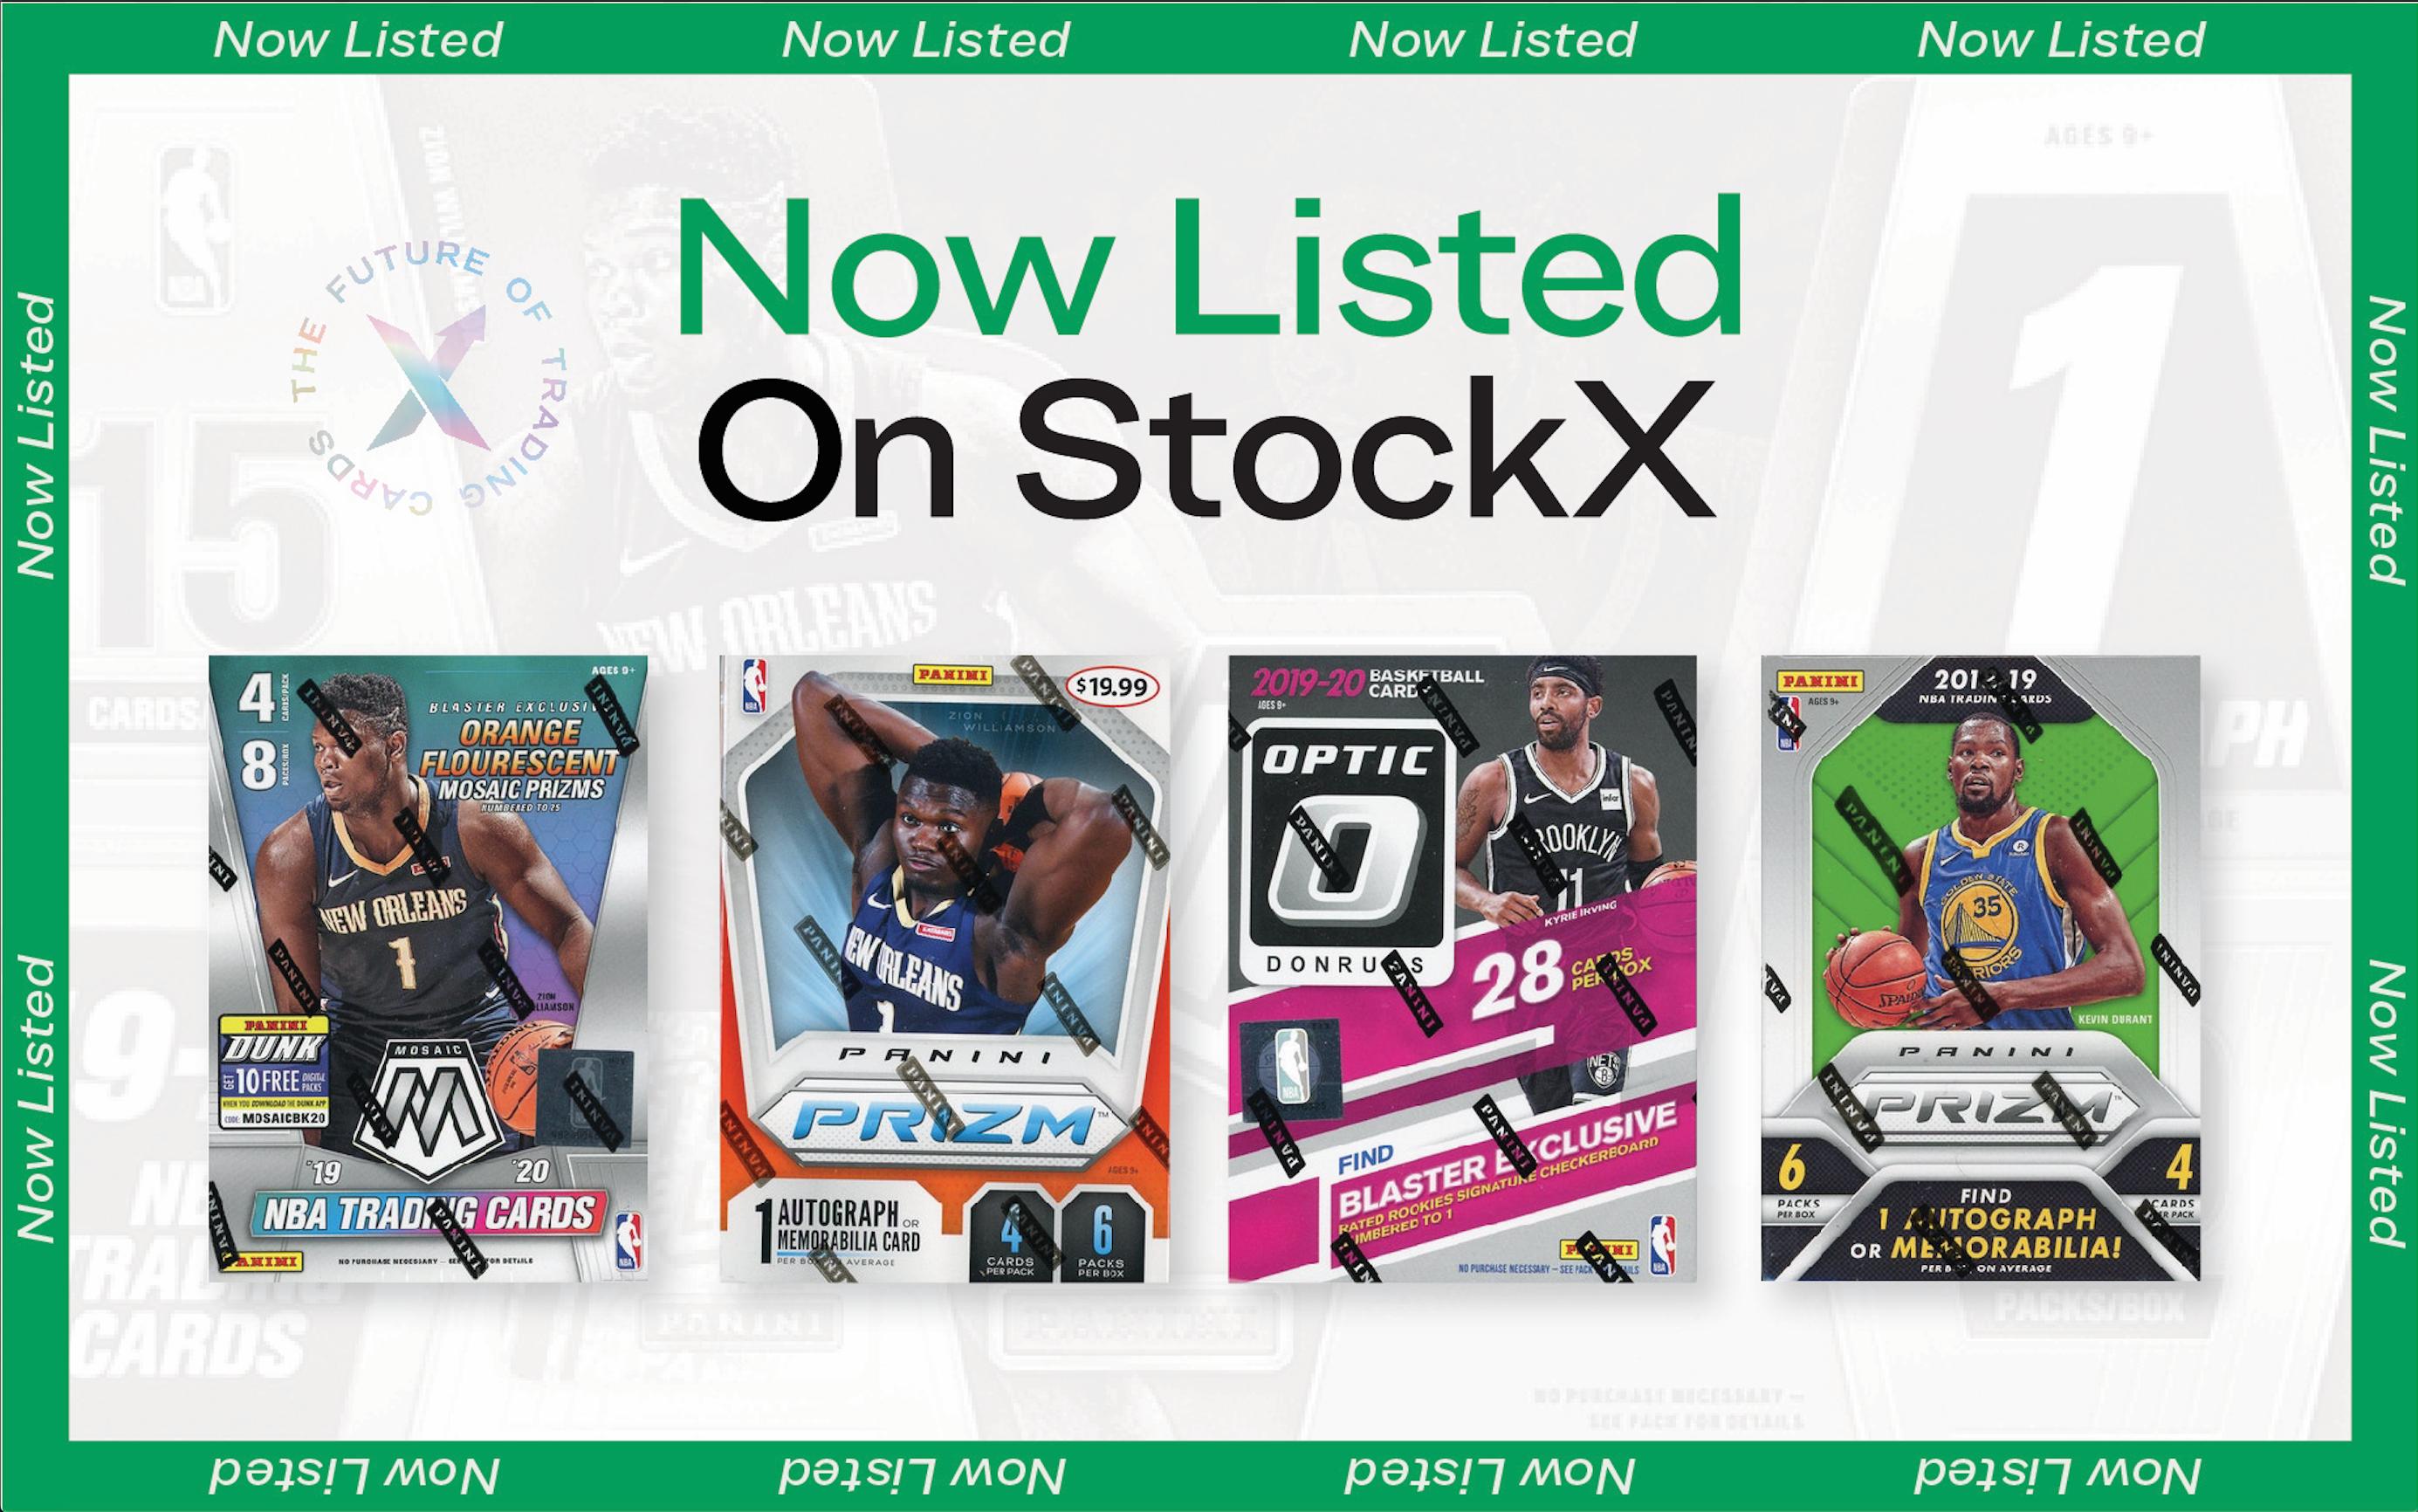 Most Valuable Panini Basketball Blaster Boxes on StockX